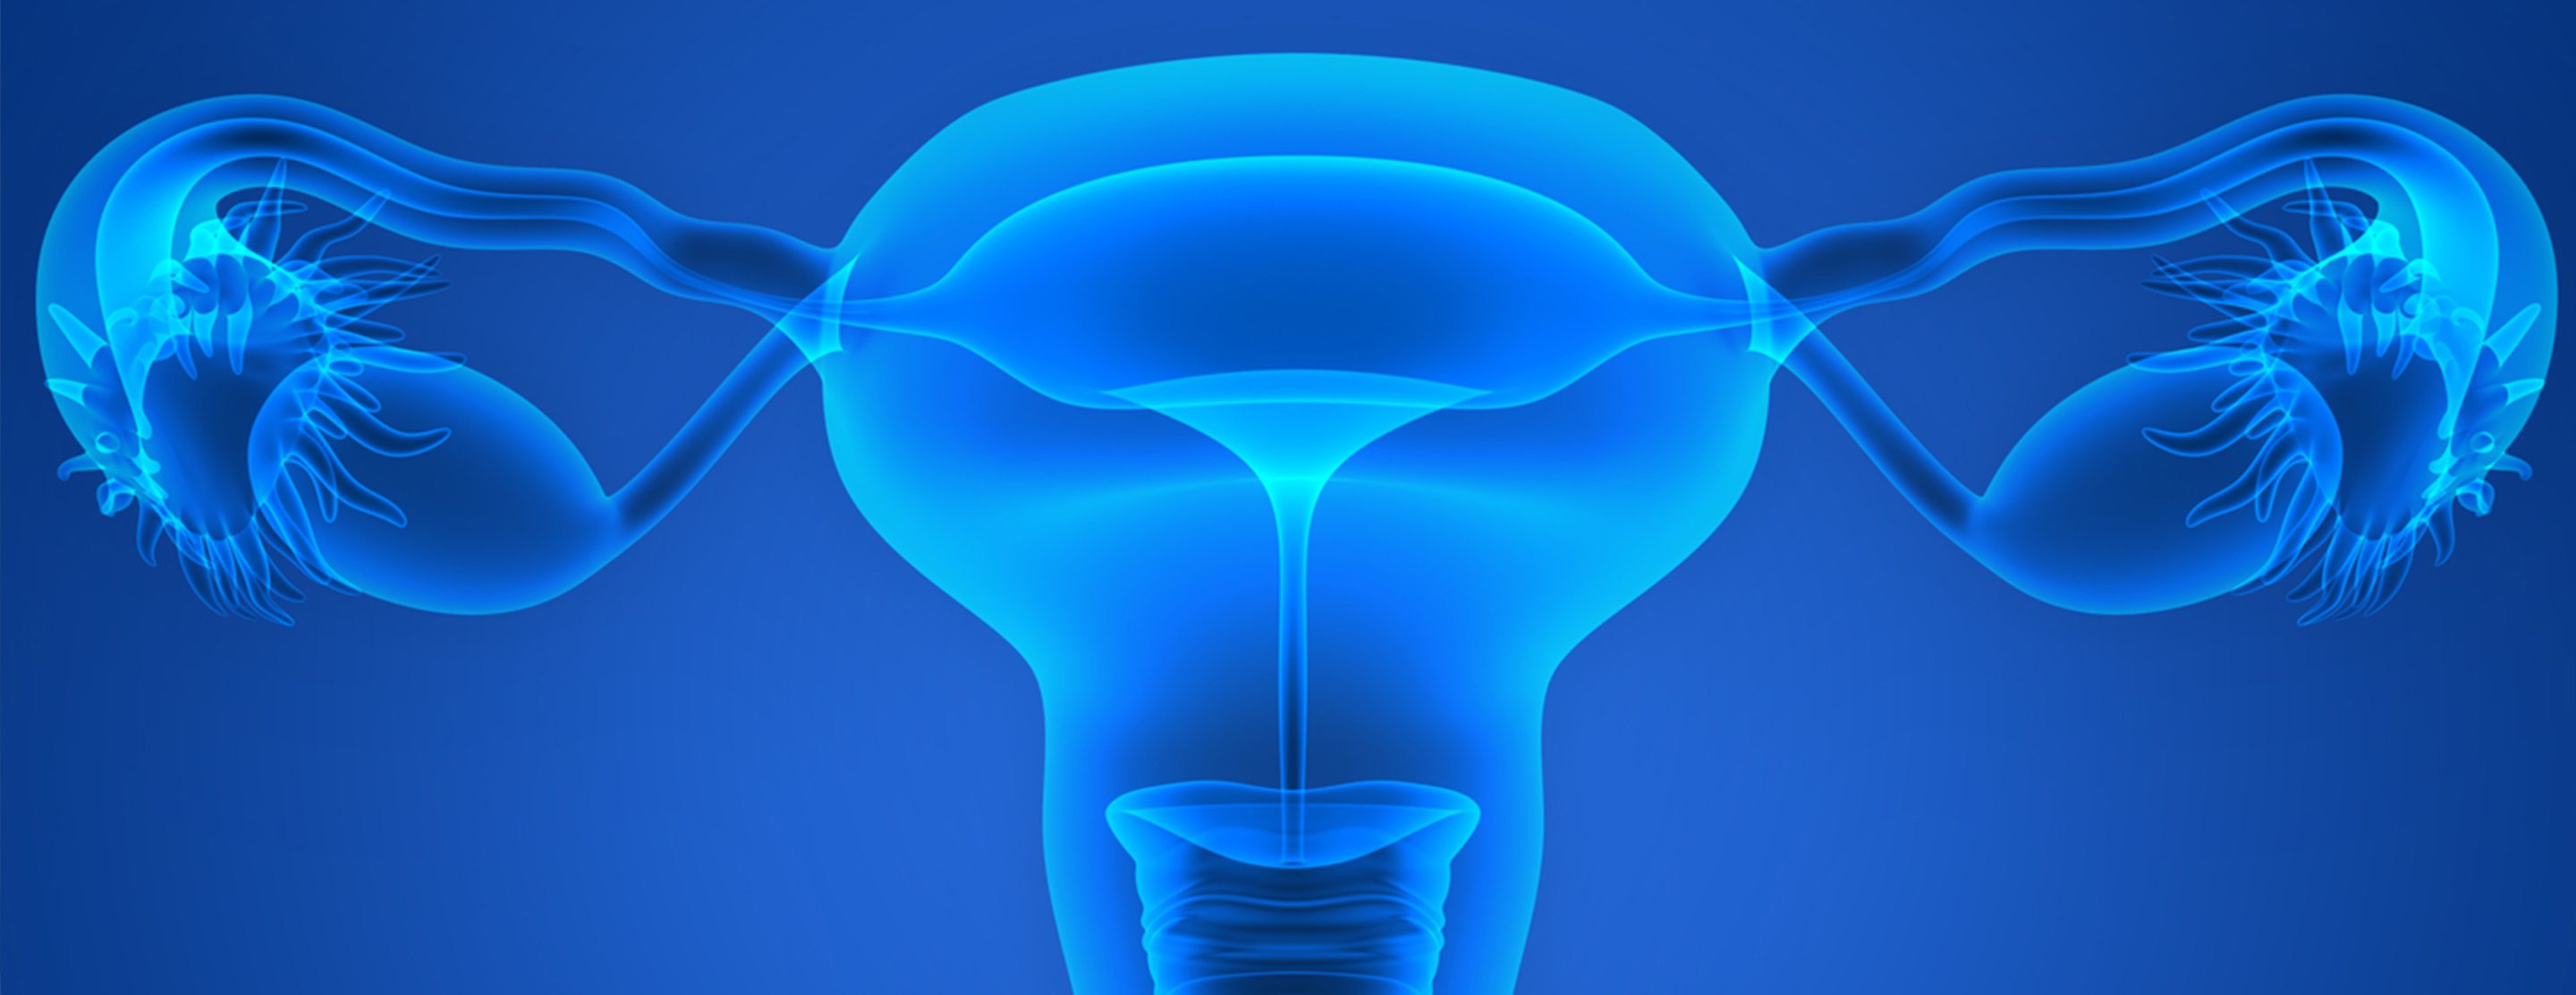 How the Menstrual Cycle Changes Women's Brains - For the Better